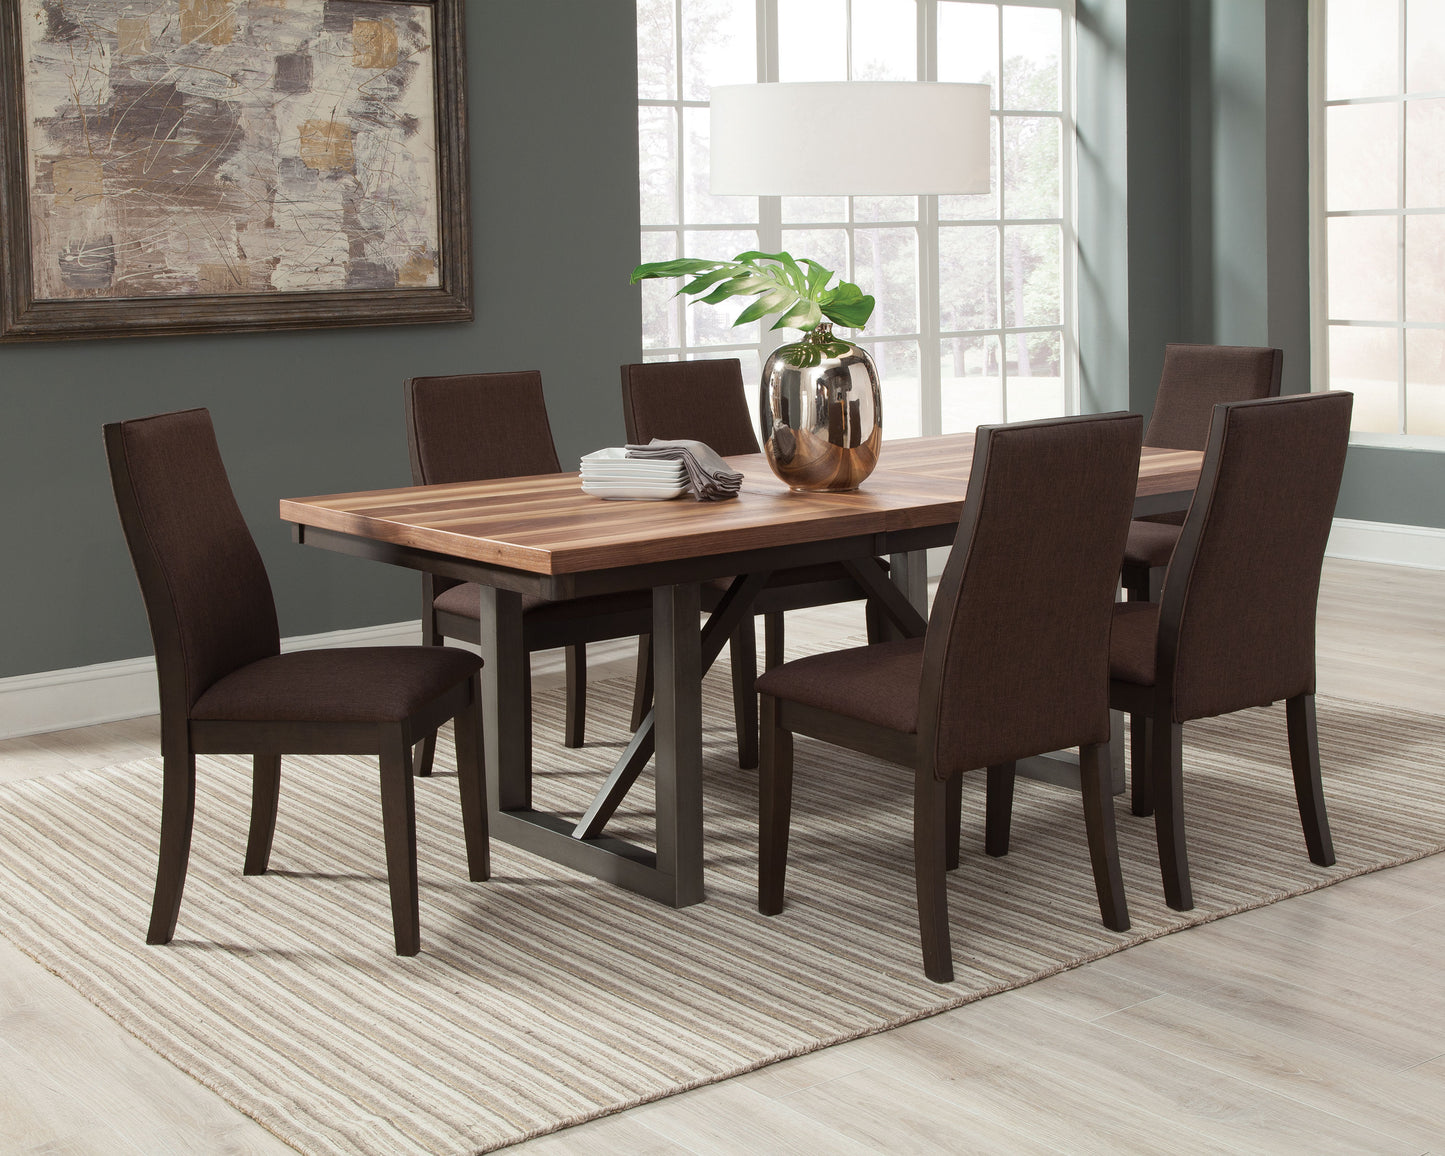 Spring Creek 5-piece Dining Room Set Natural Walnut and Rich Cocoa Brown